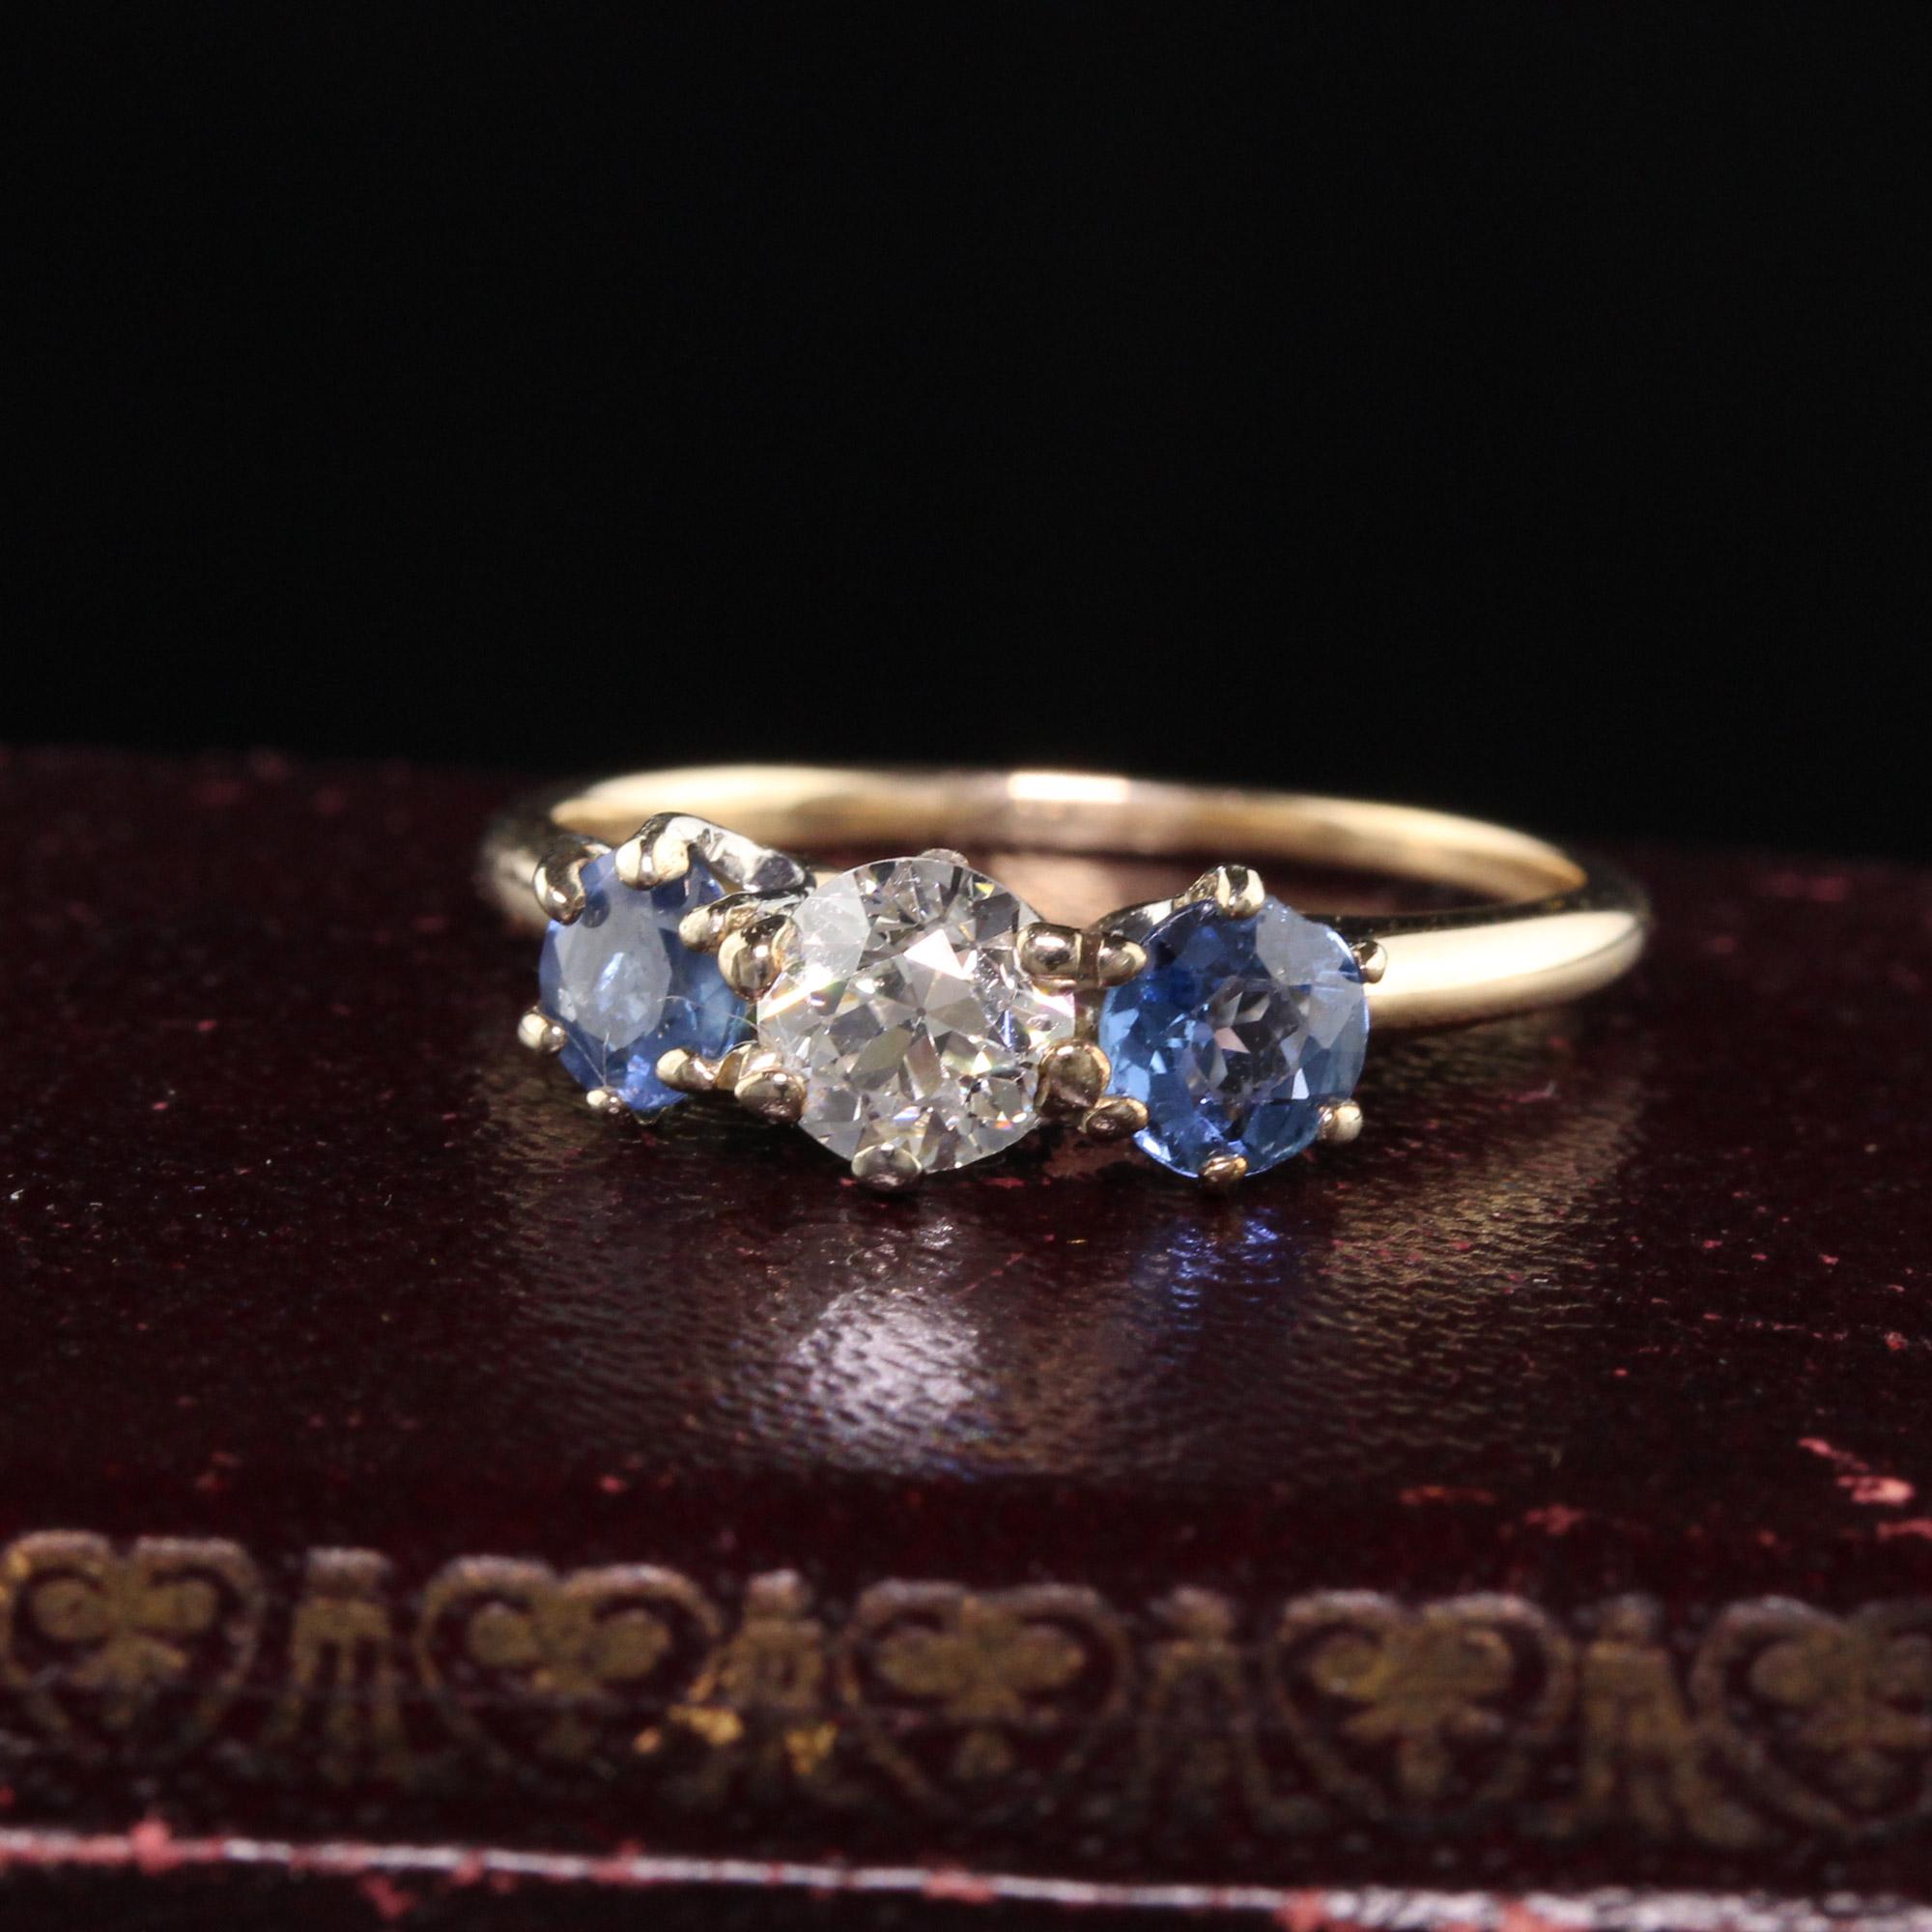 Beautiful Antique Victorian 14K Yellow Gold Old European Diamond Sapphire Three Stone Ring. This amazing three stone ring has two blue sapphires on the sides with an old european cut diamond in the center.

Item #R0988

Metal: 14K Yellow